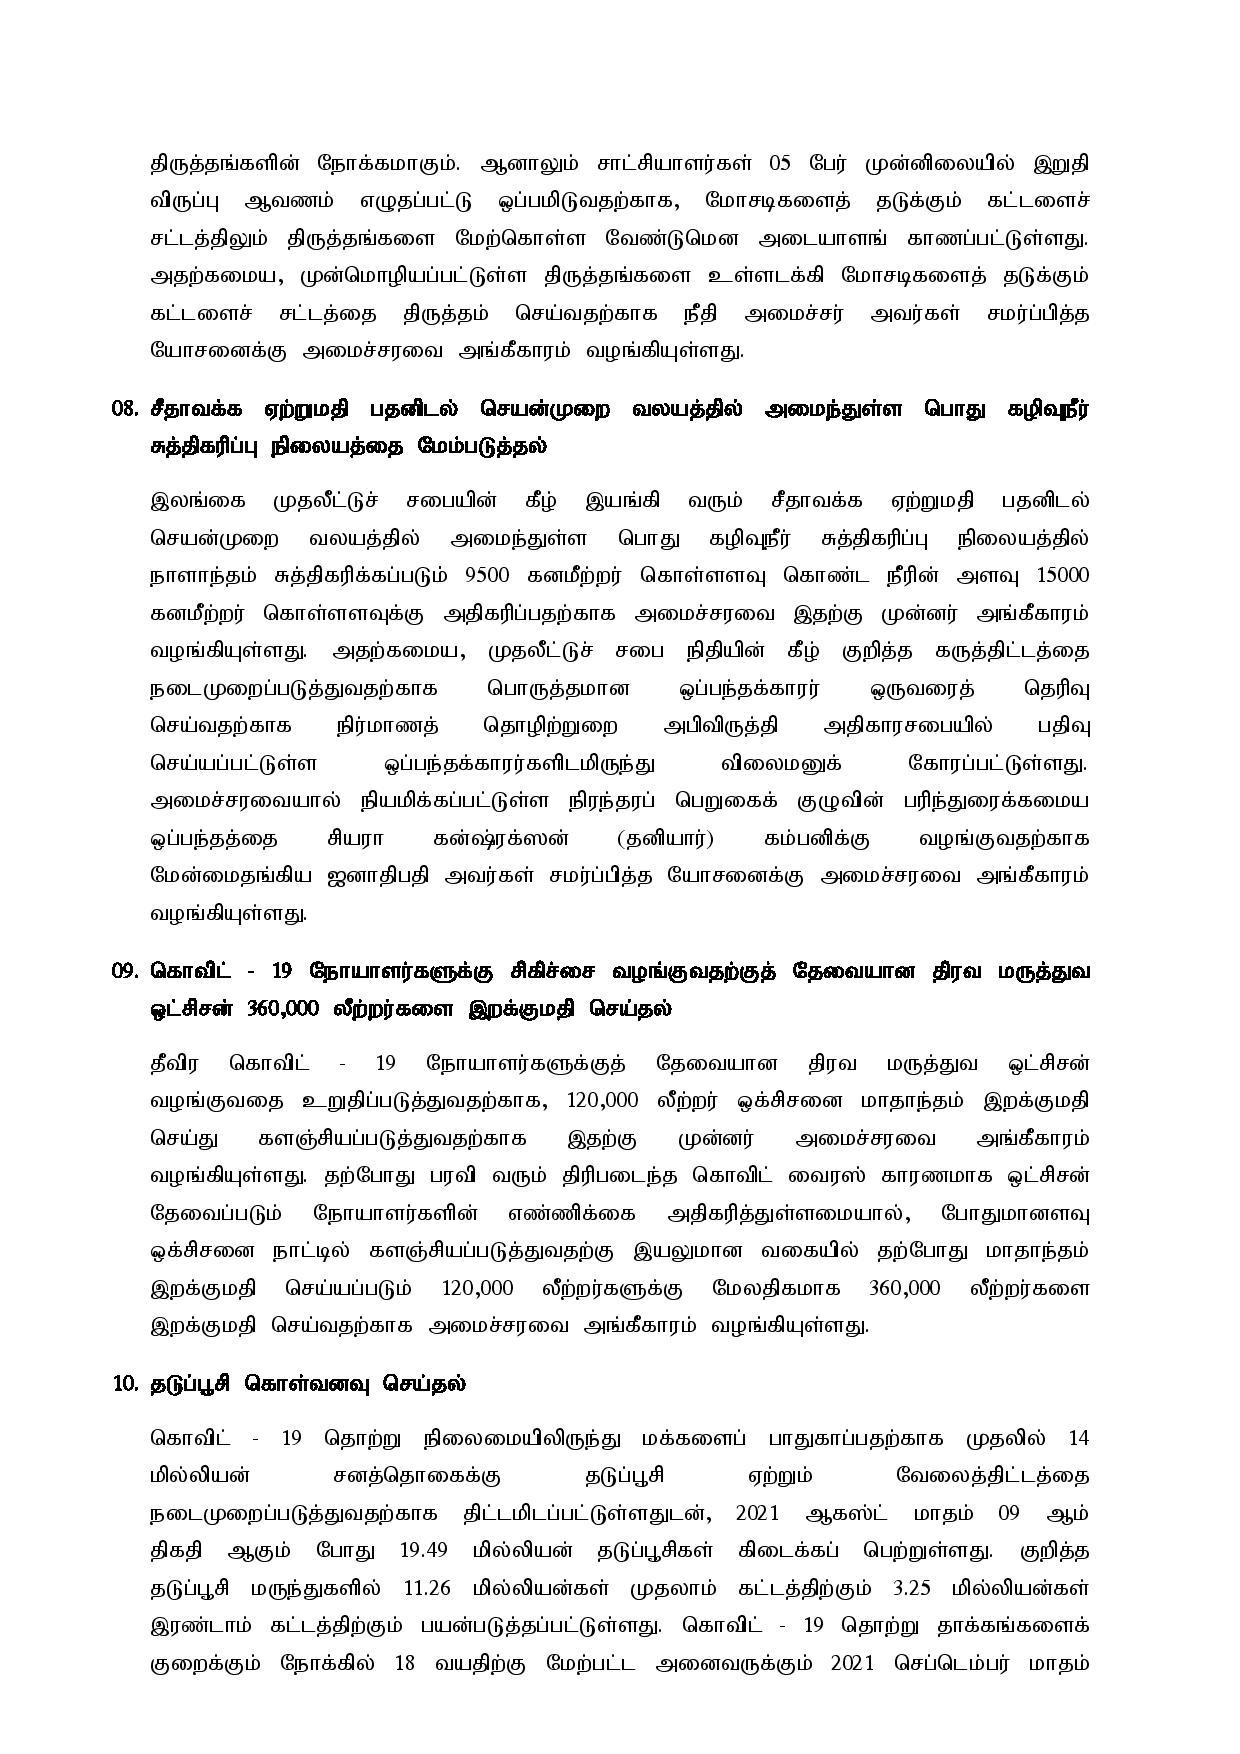 Cabinet Decision on 17.08.2021 Tamil page 004